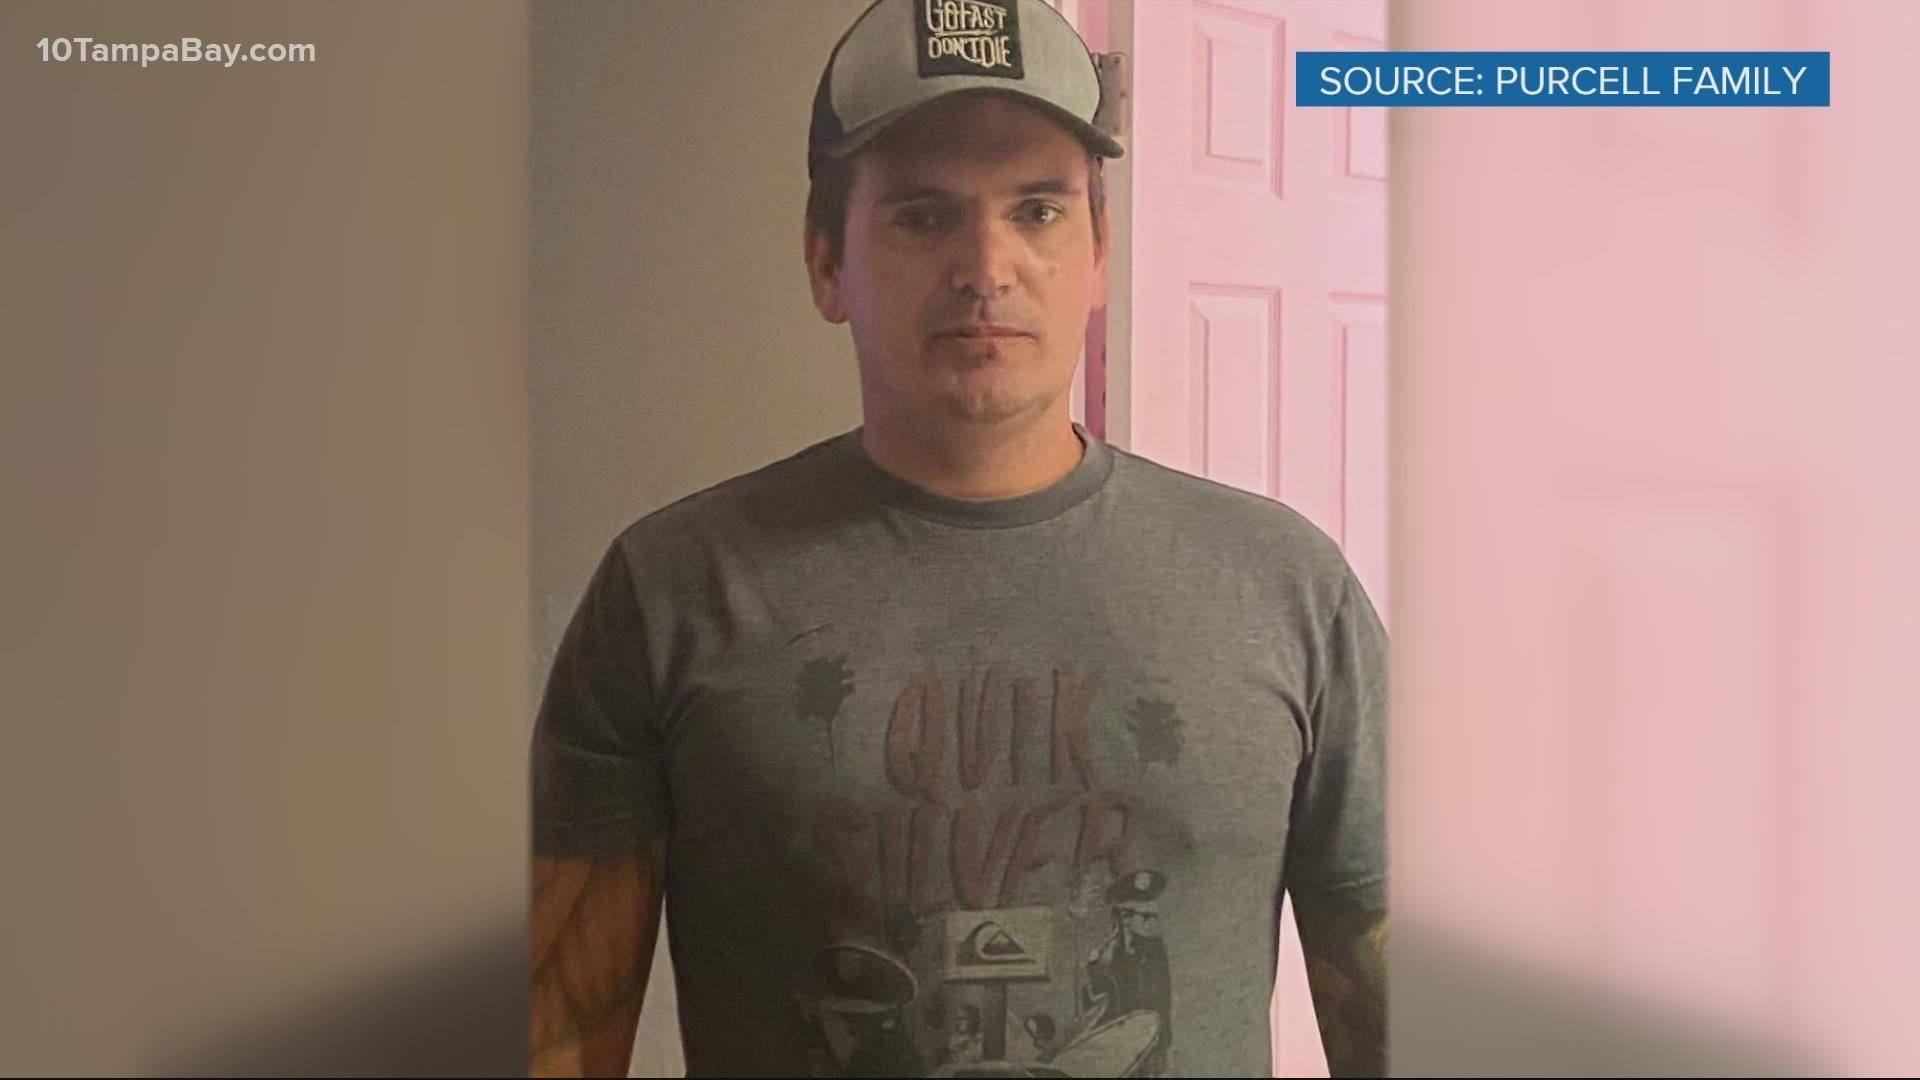 Family members say 40-year-old Evan Purcell was "nearly beaten to death" in the attack.